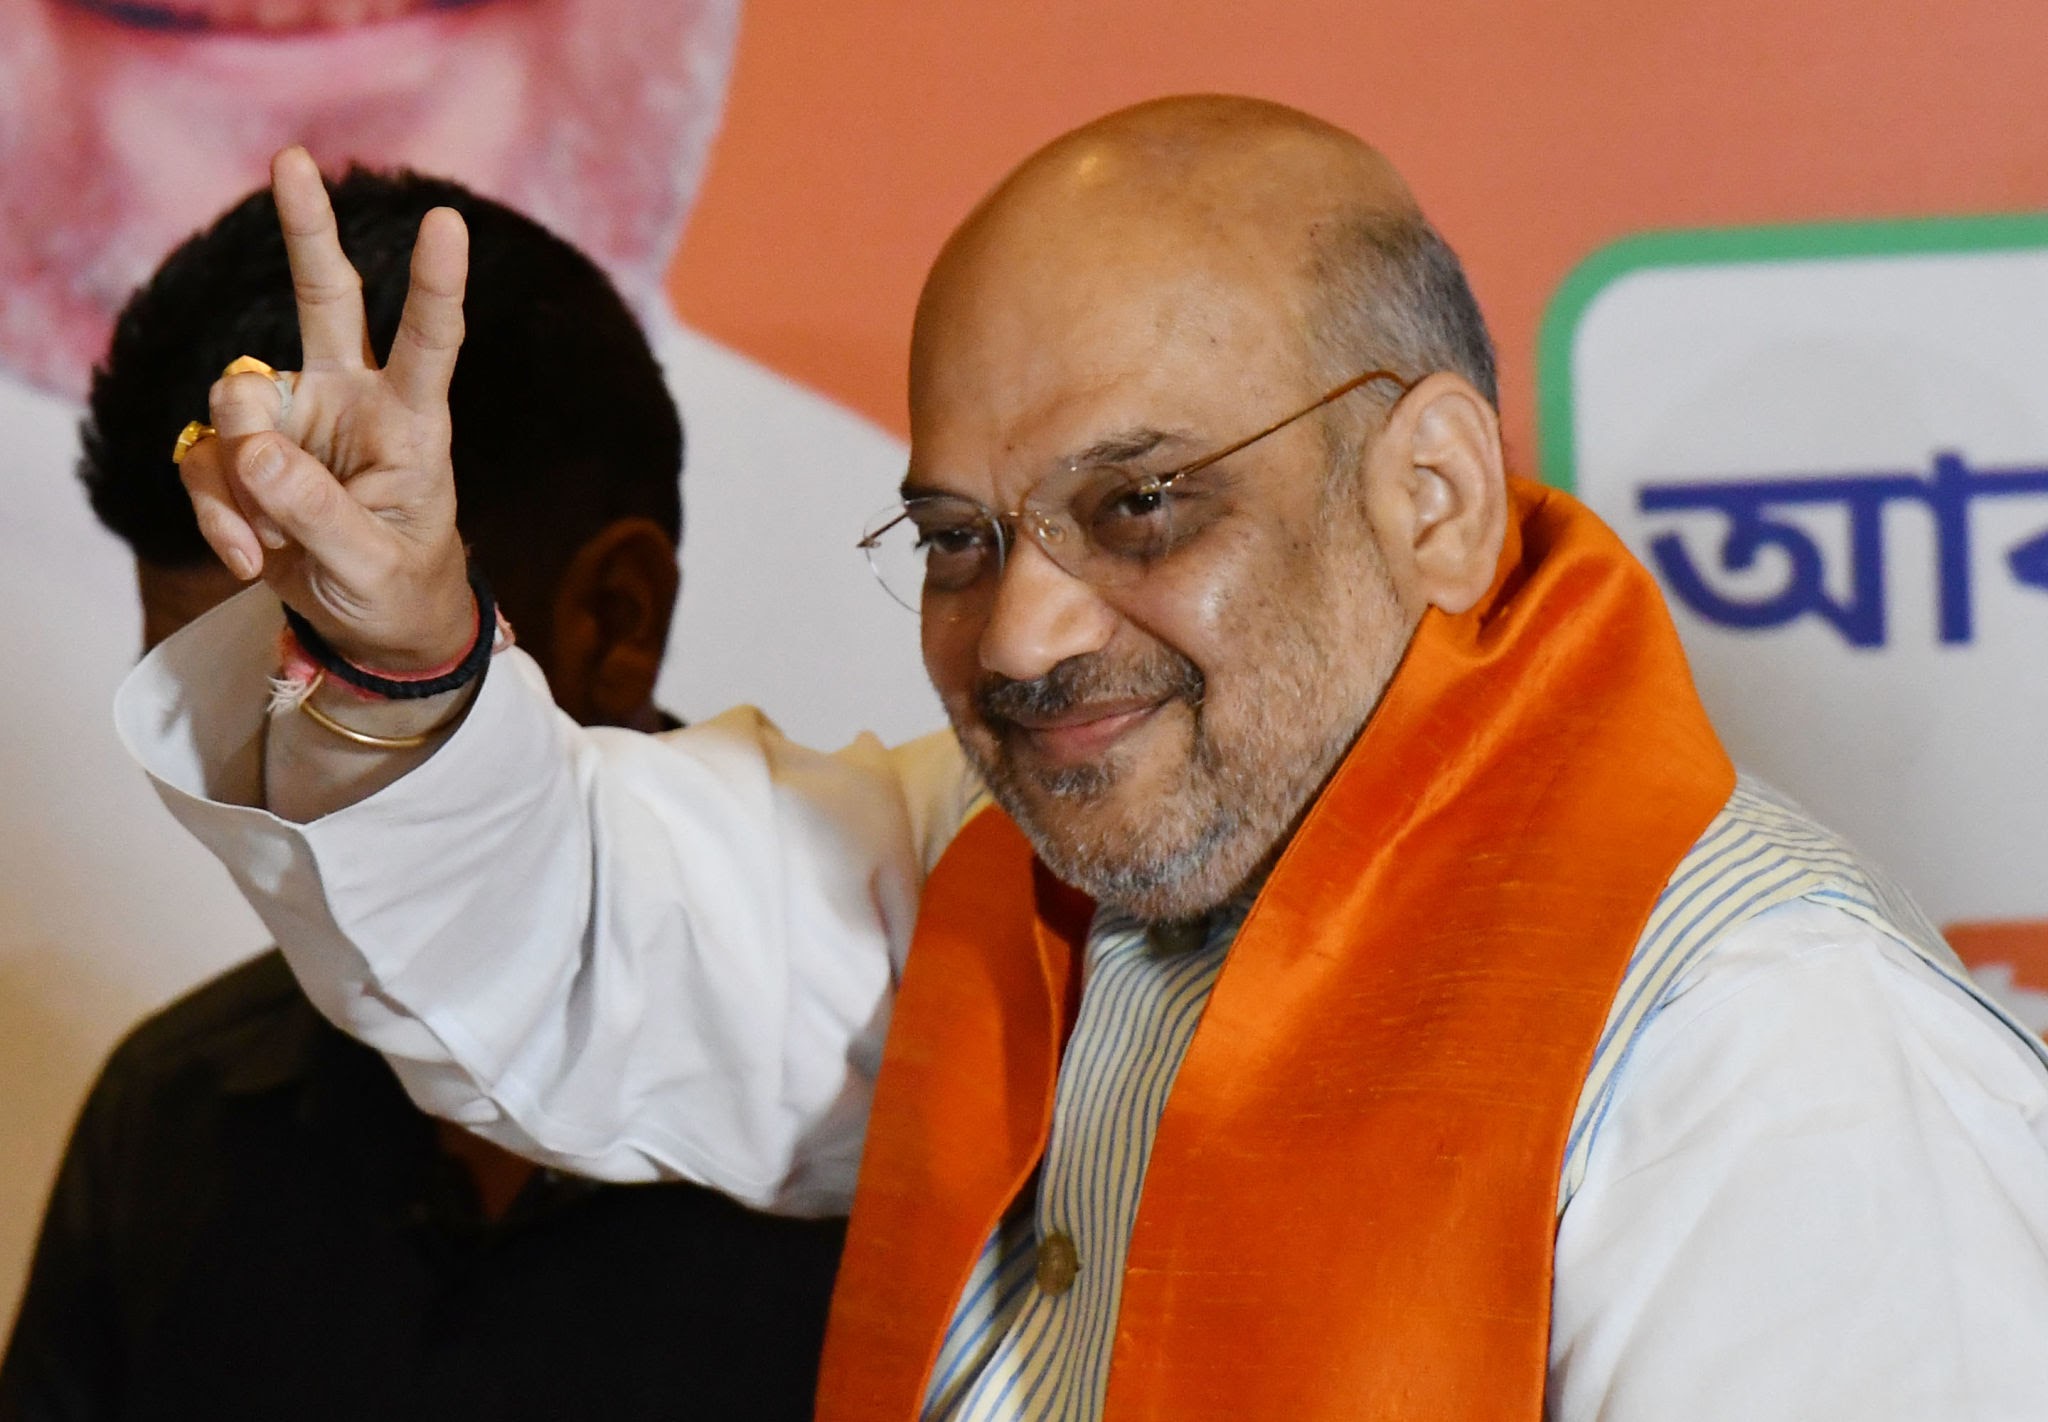 Post Shah’s visit, Congress appoints veteran tribal leader in MP